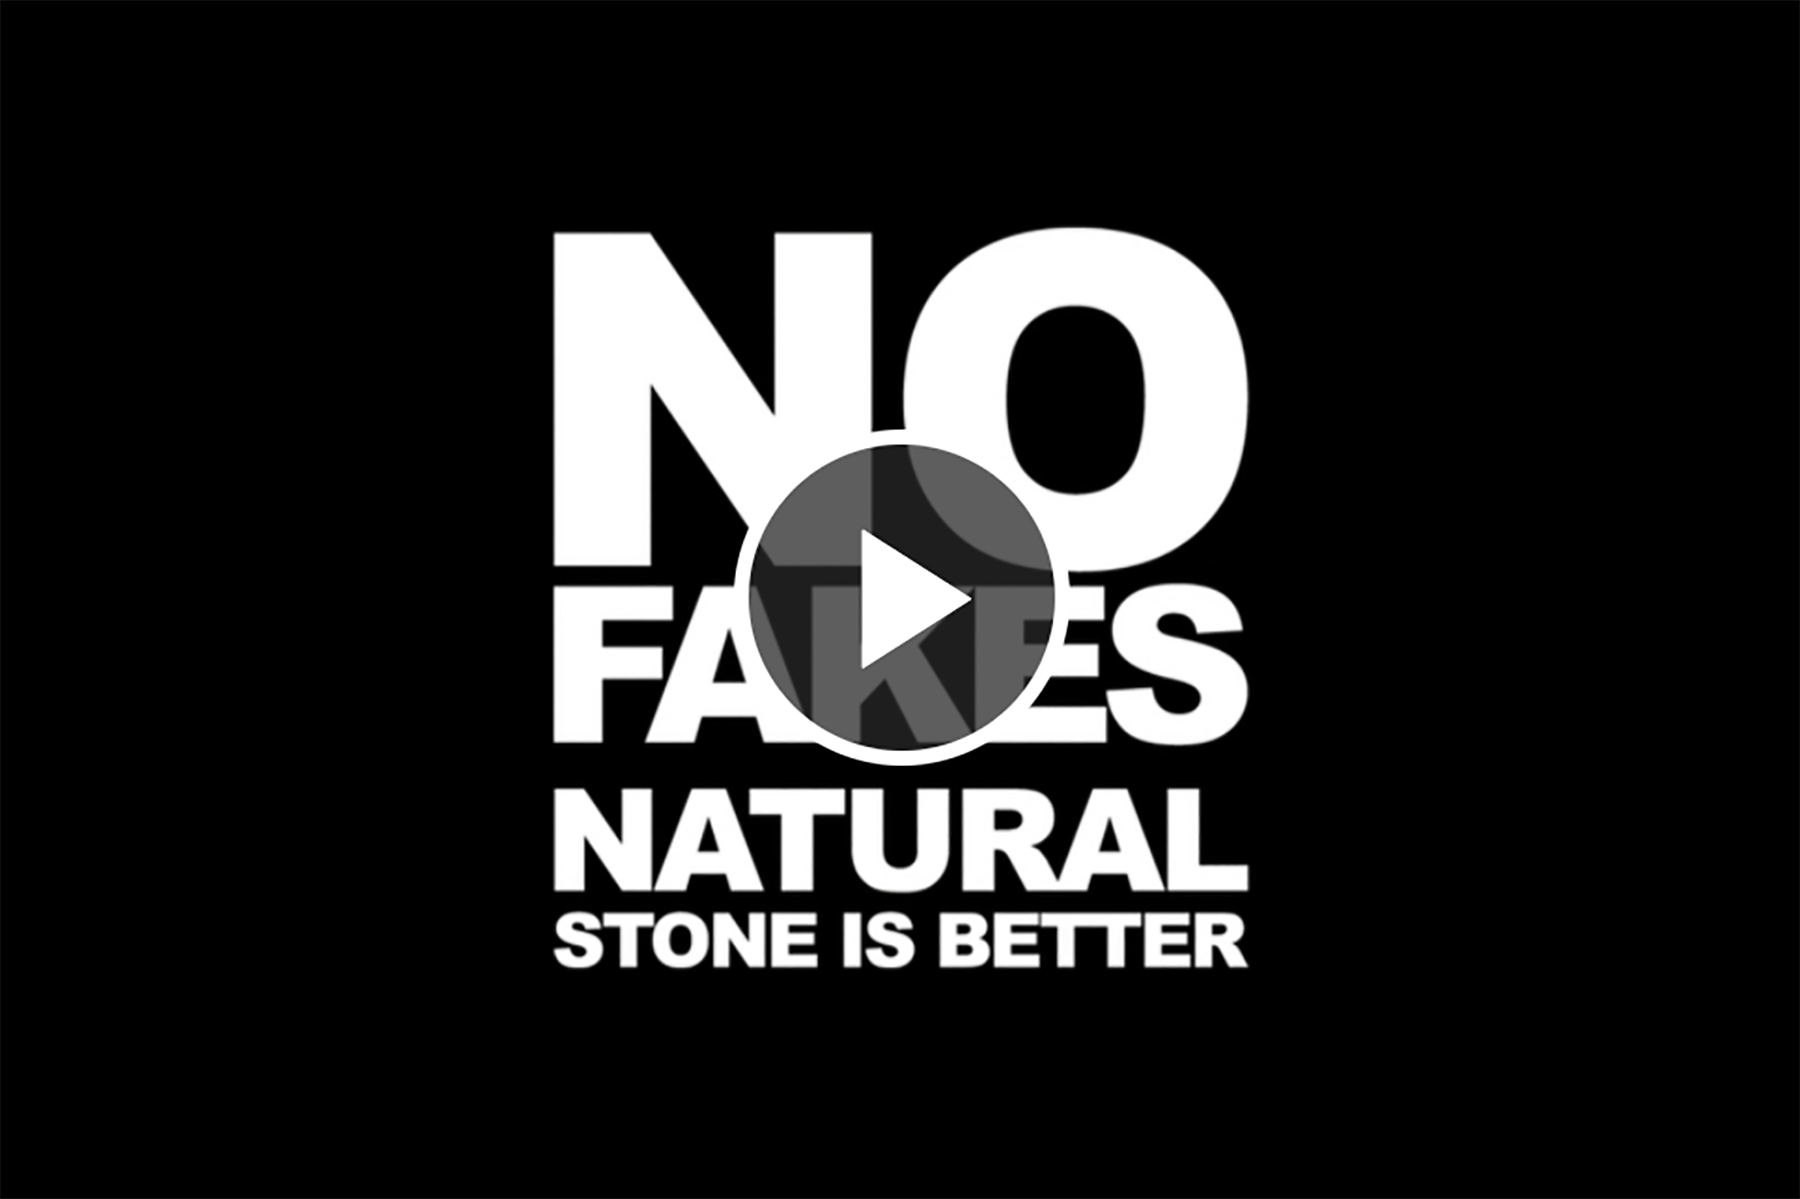 No fakes. Natural stone is better - PNA's new campaign kicks off.